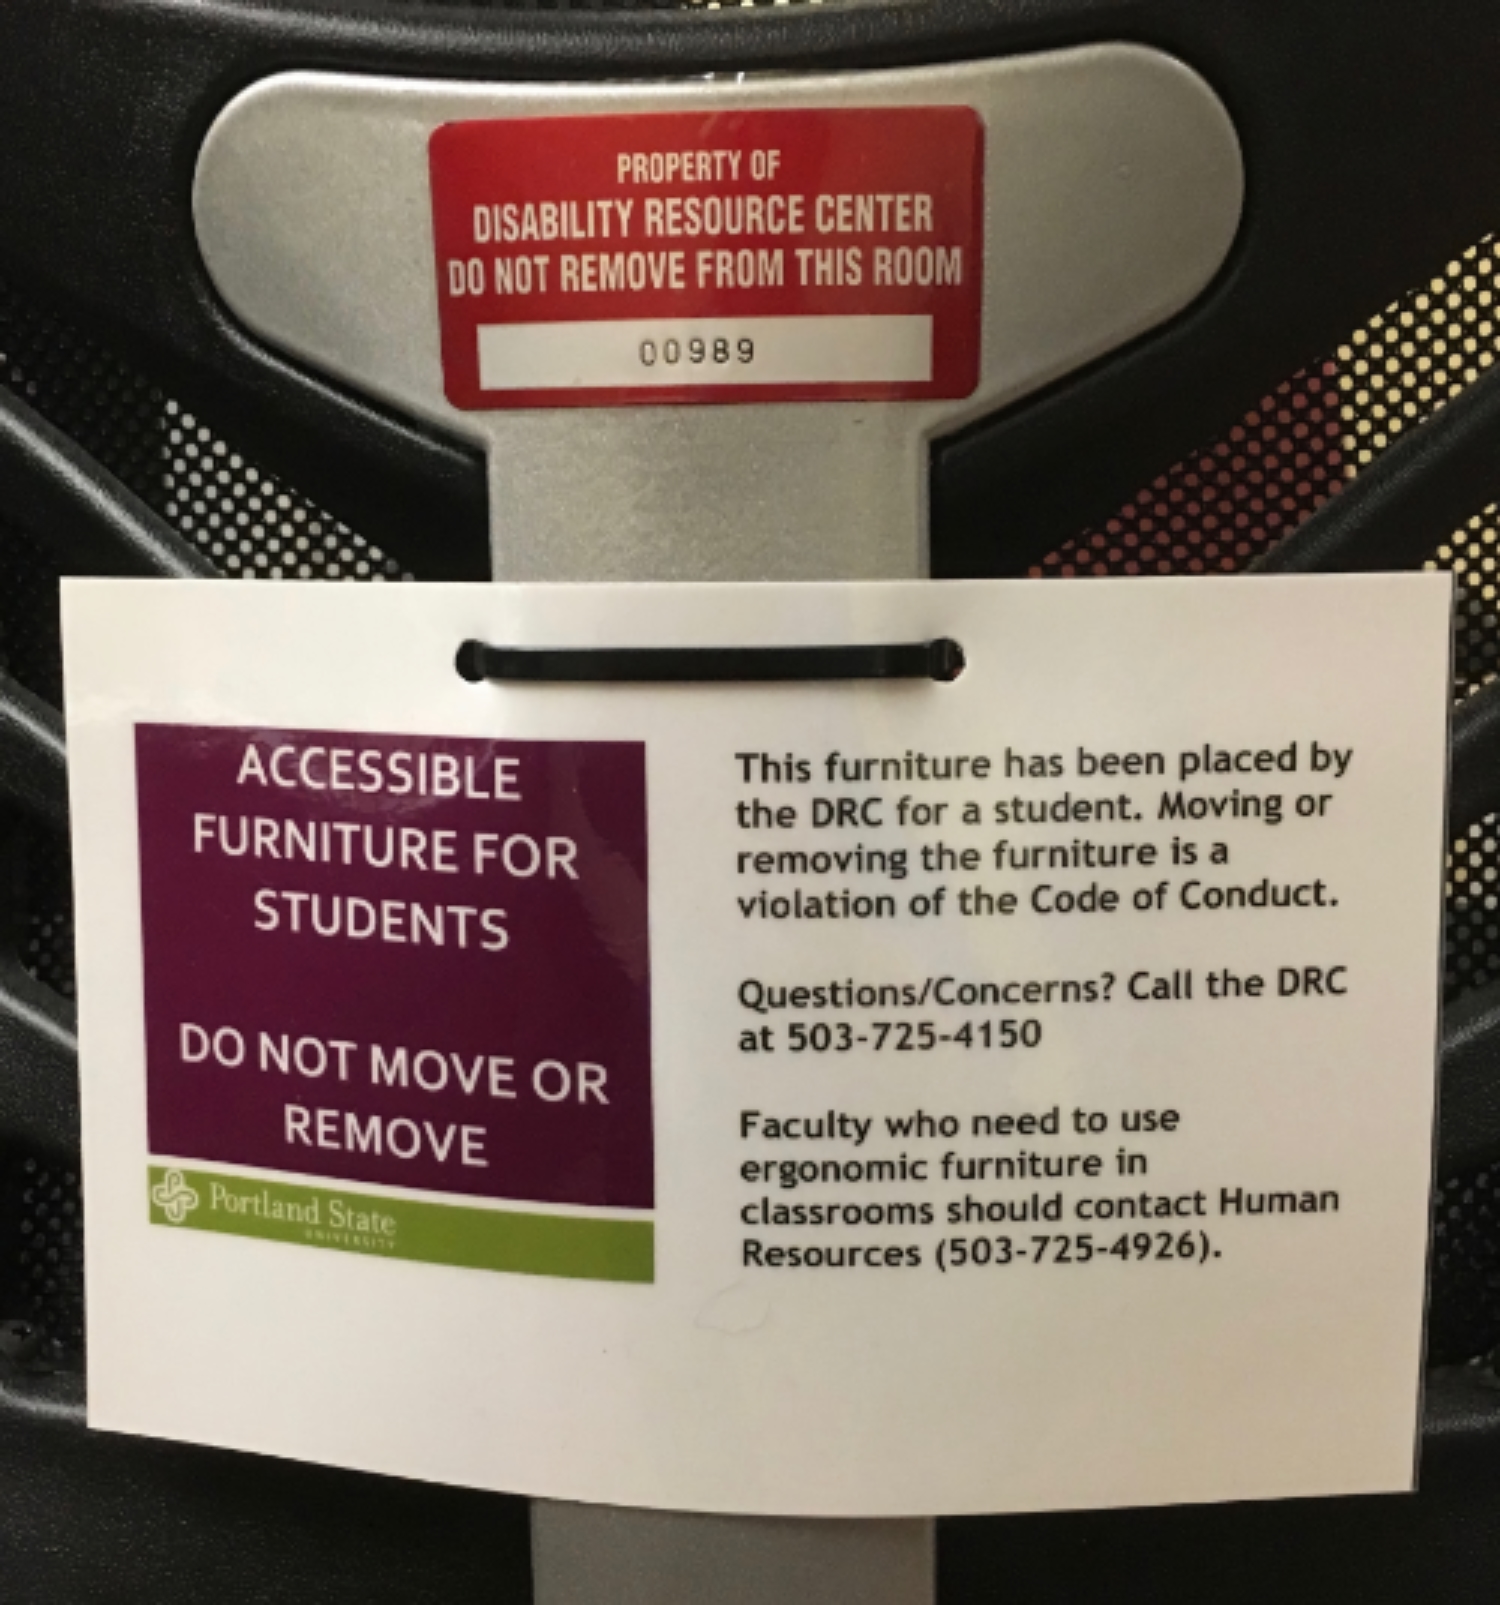 Back of chair with a red label with numbers with text: "Property of Disability Resource Center Do not remove from this room" and white label with purple box with text: "accessible furniture for students do not move or remove".